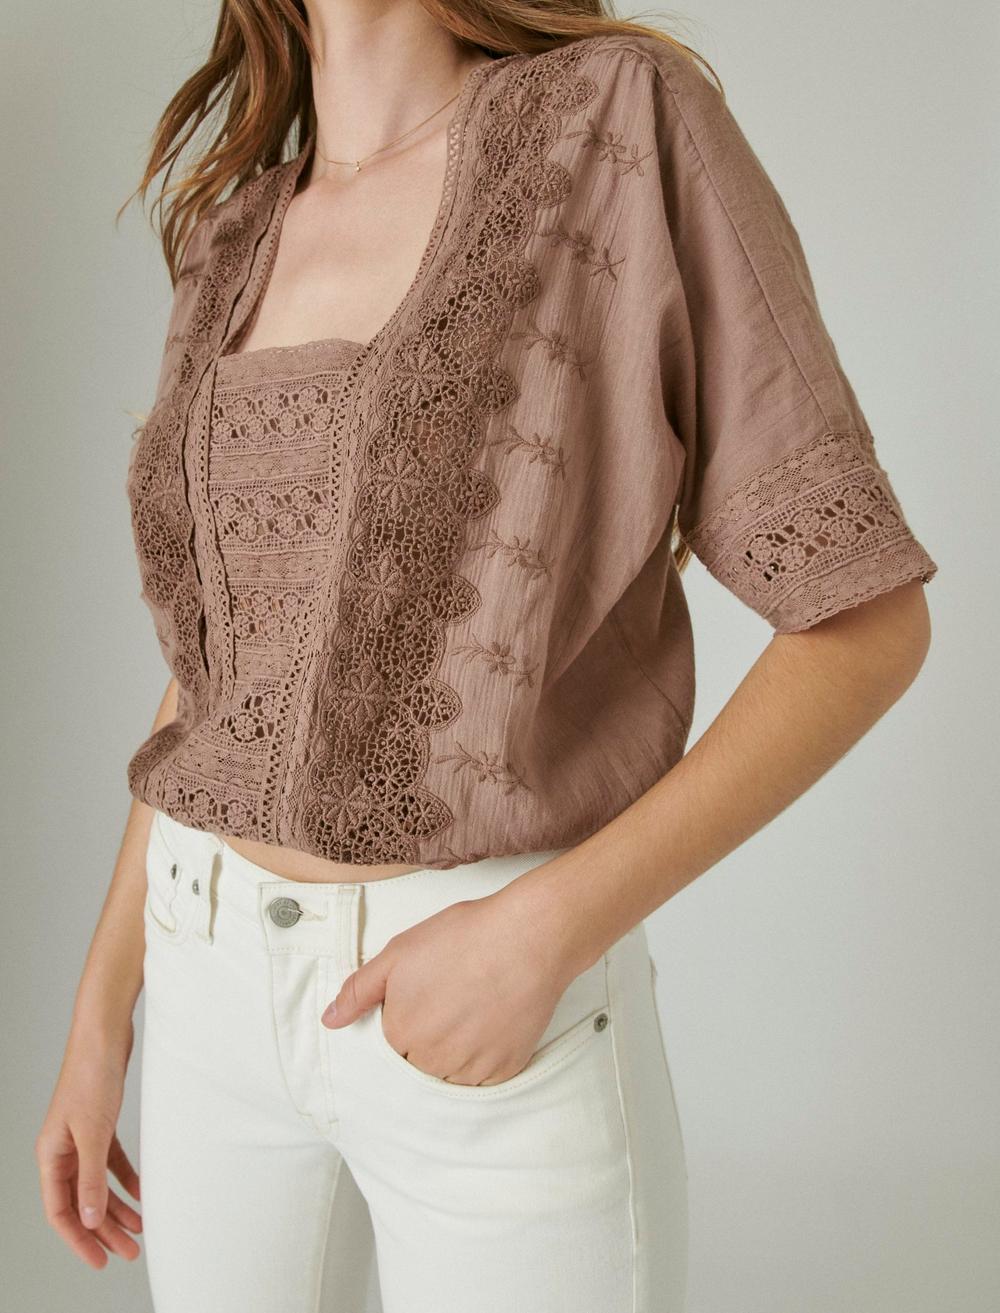 LACE SHORT SLEEVE TOP, image 6